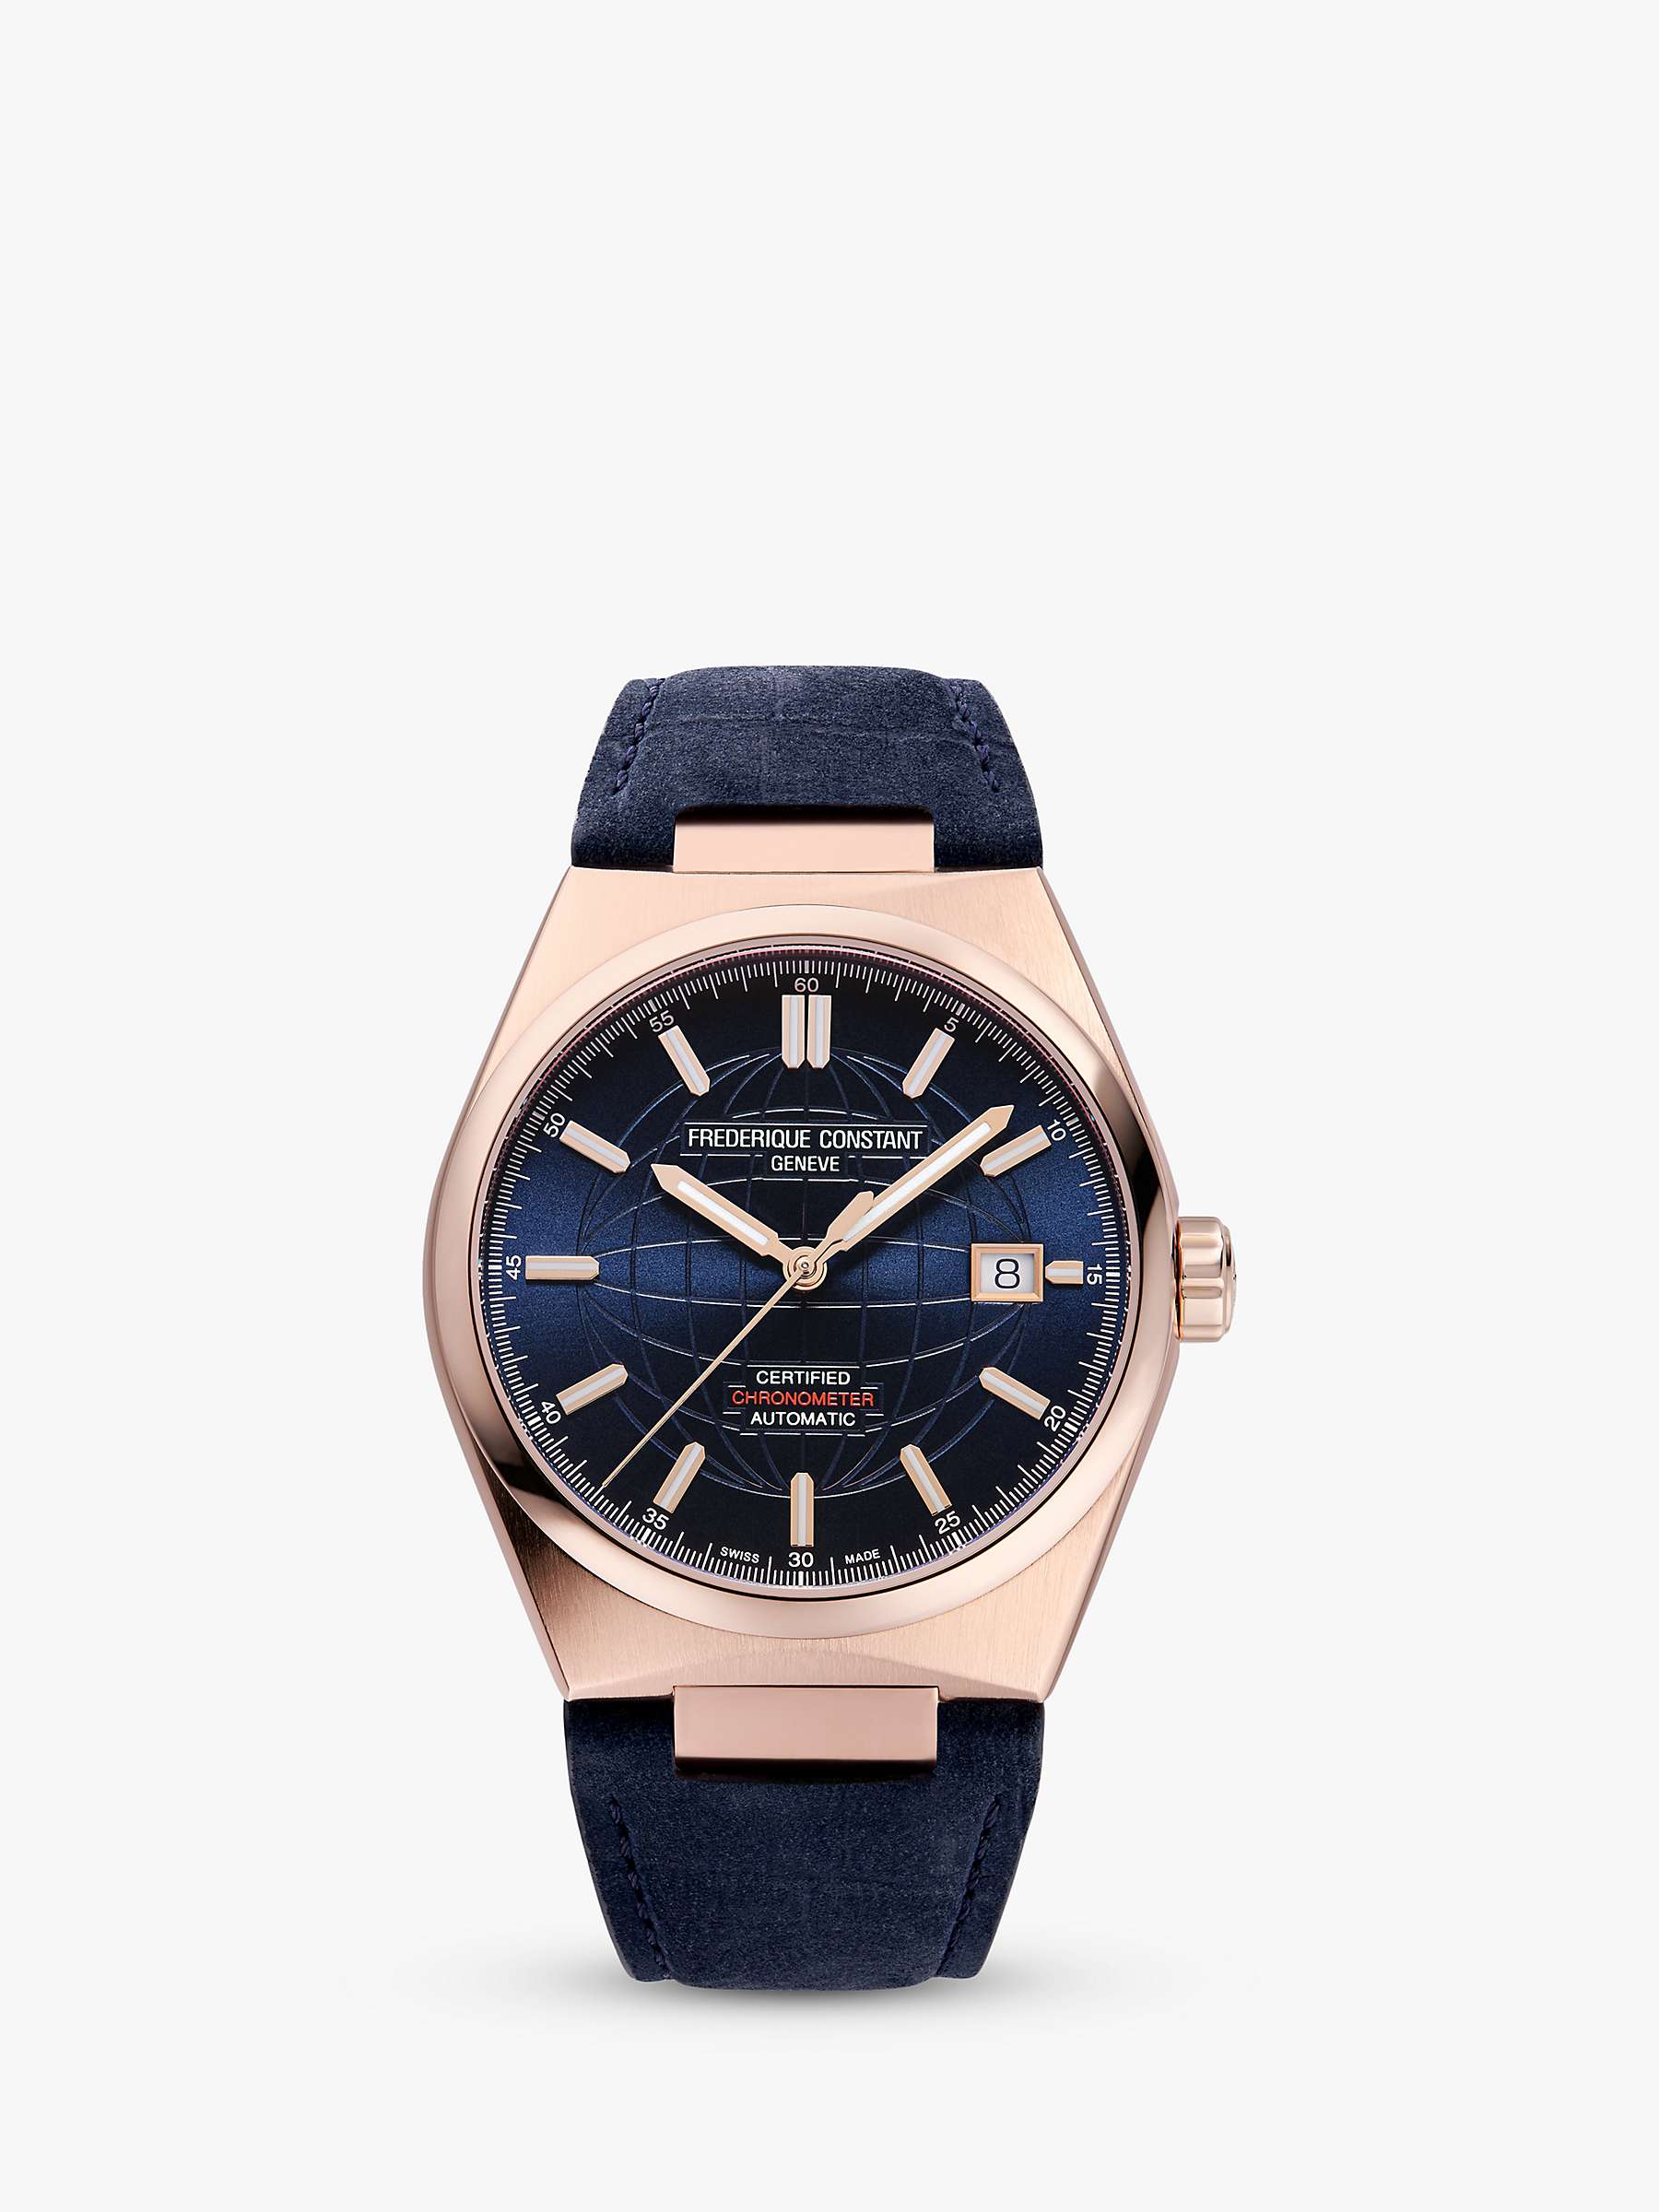 Buy Frederique Constant FC-303N3NH4 Men's Highlife Automatic Leather Strap Watch, Blue Online at johnlewis.com